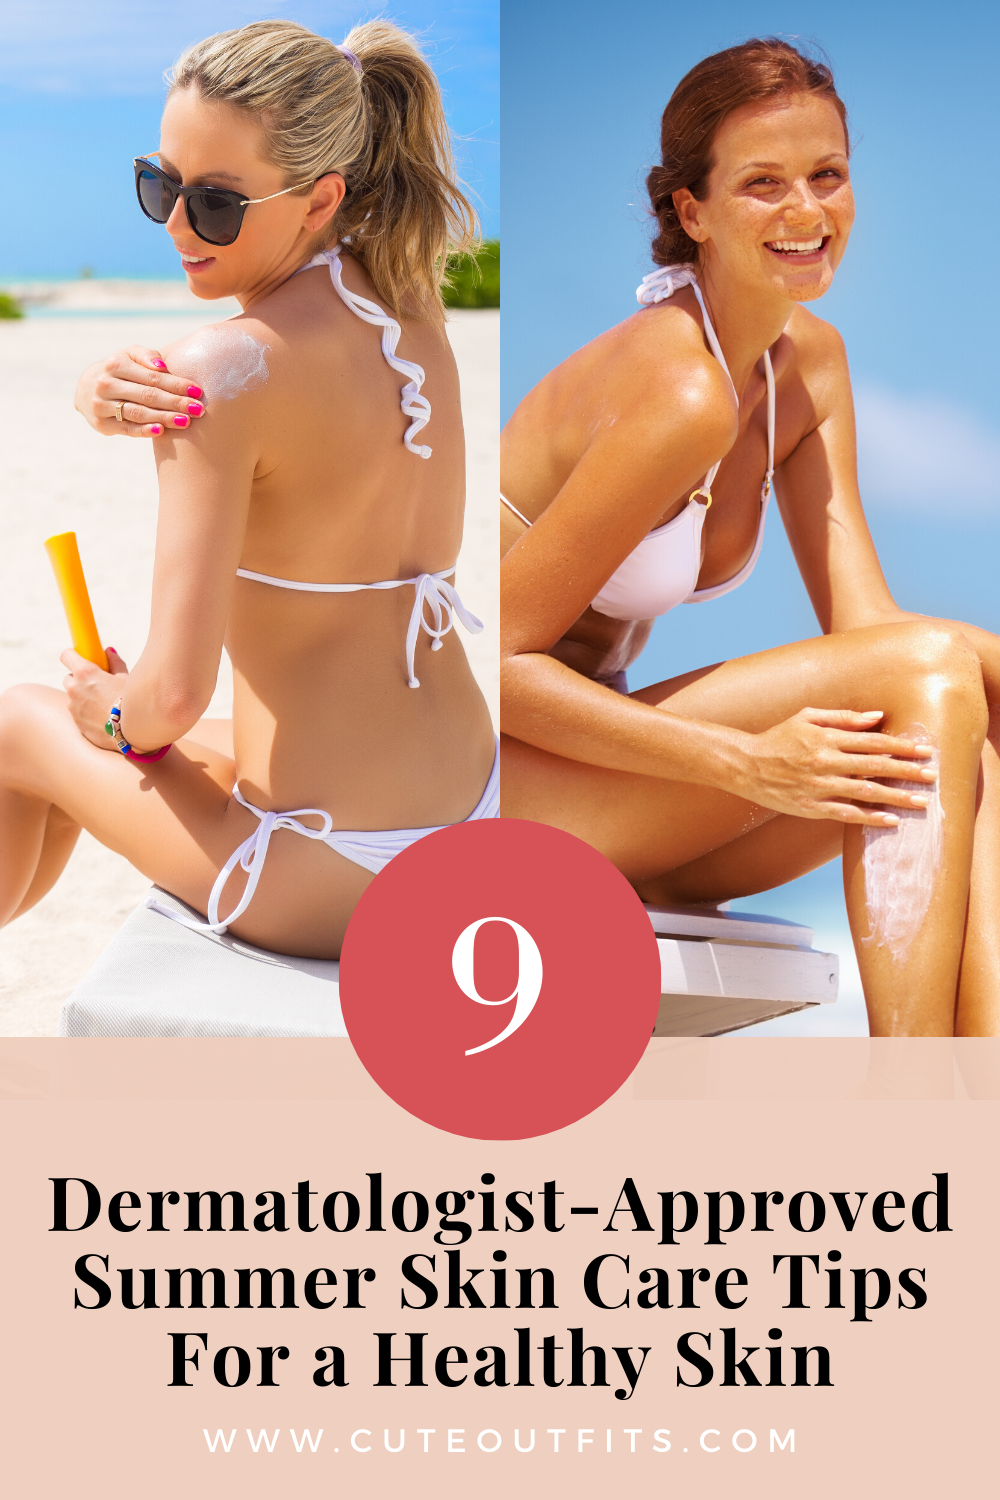 placard | 9 Dermatologist Approved Summer Skin Care Tips For a Healthy Skin